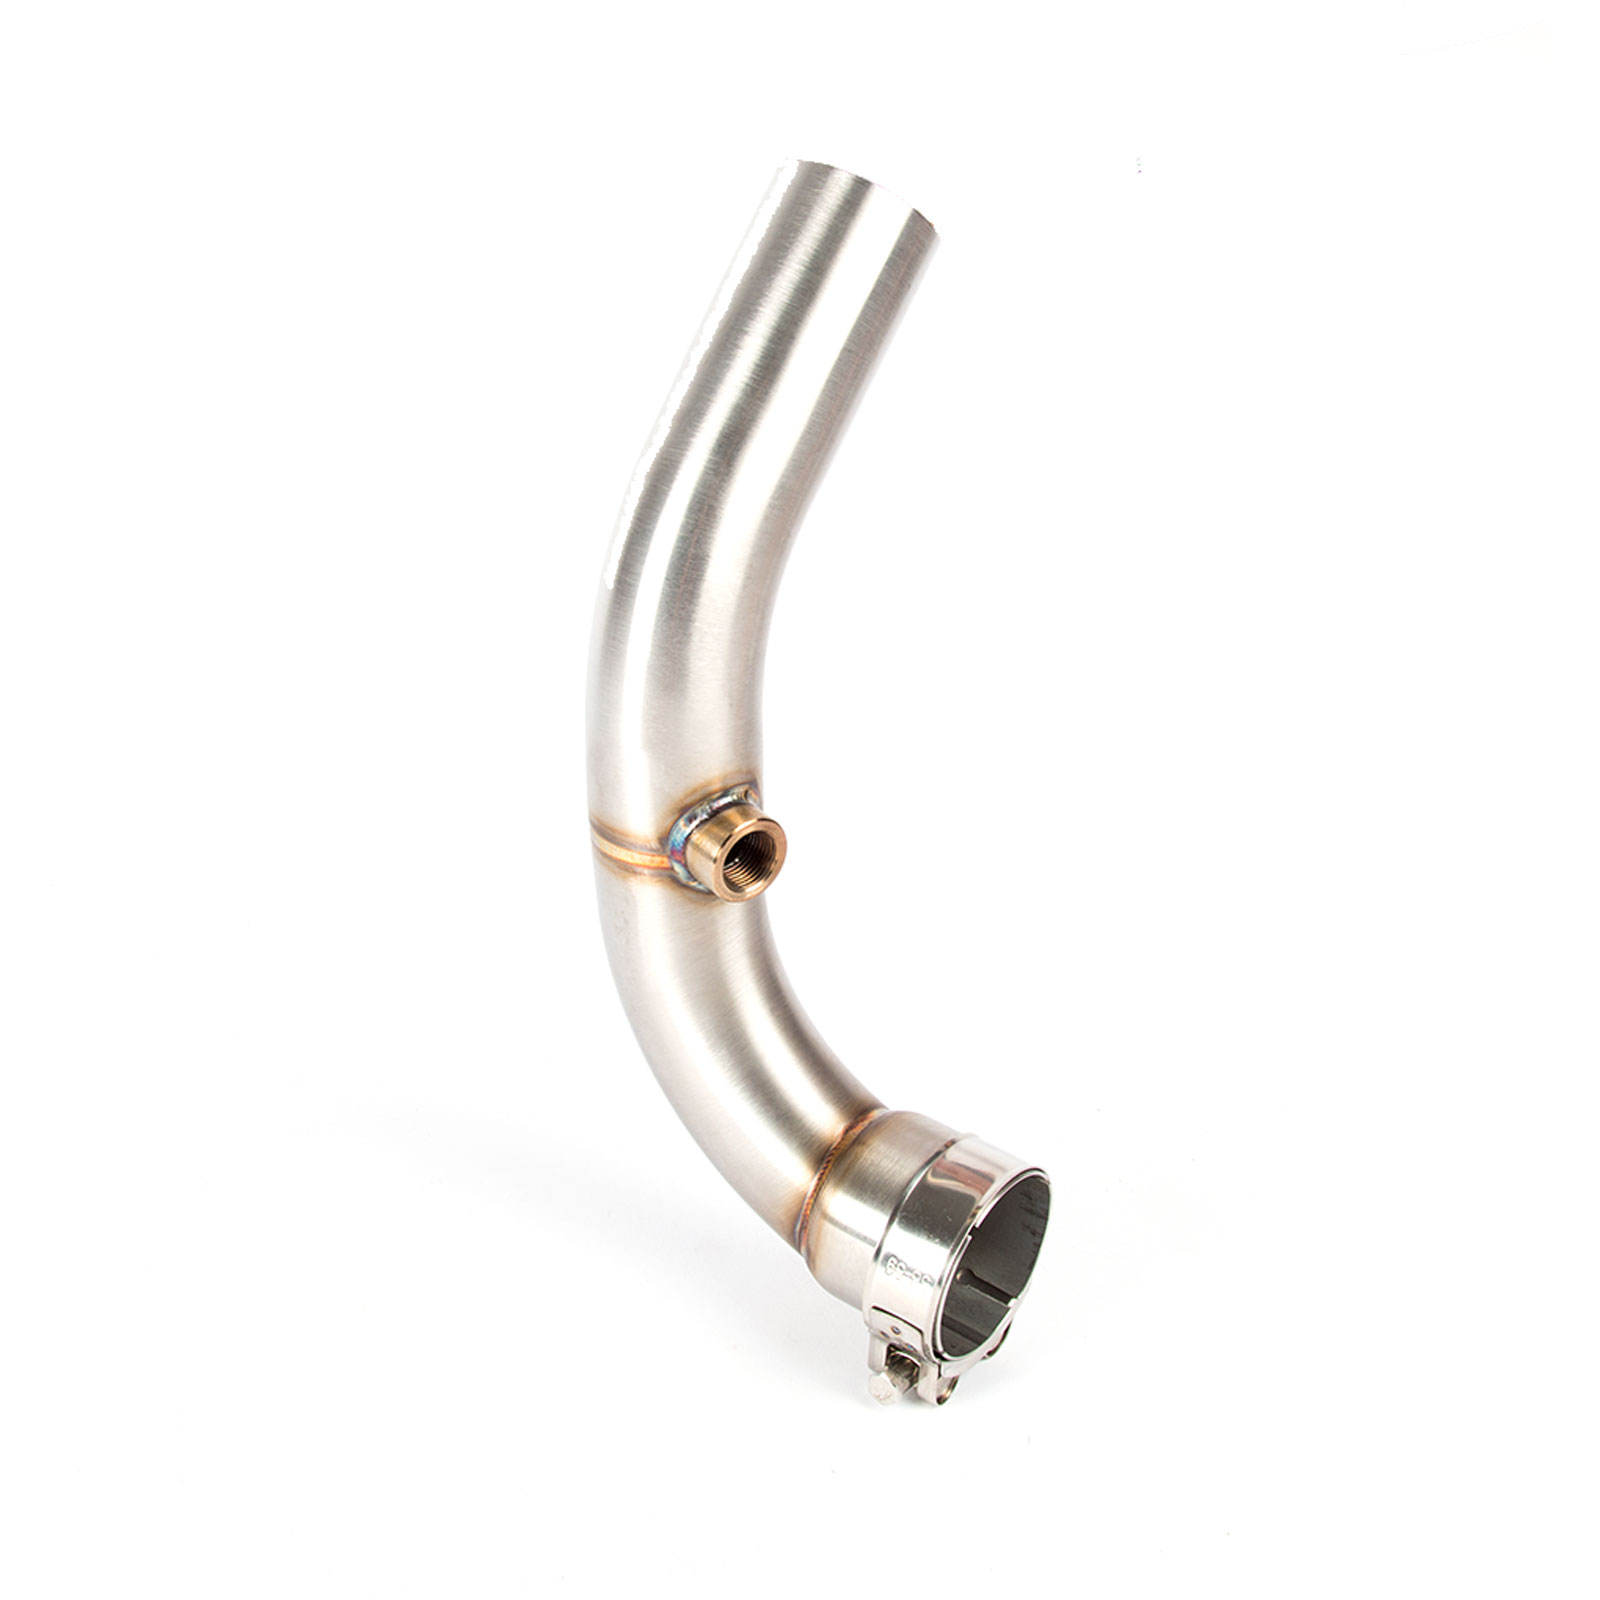 Toro Stainless Steel Decat Cat Eliminator Exhaust Pipe compatible with Honda CBR 600 RR 07-16